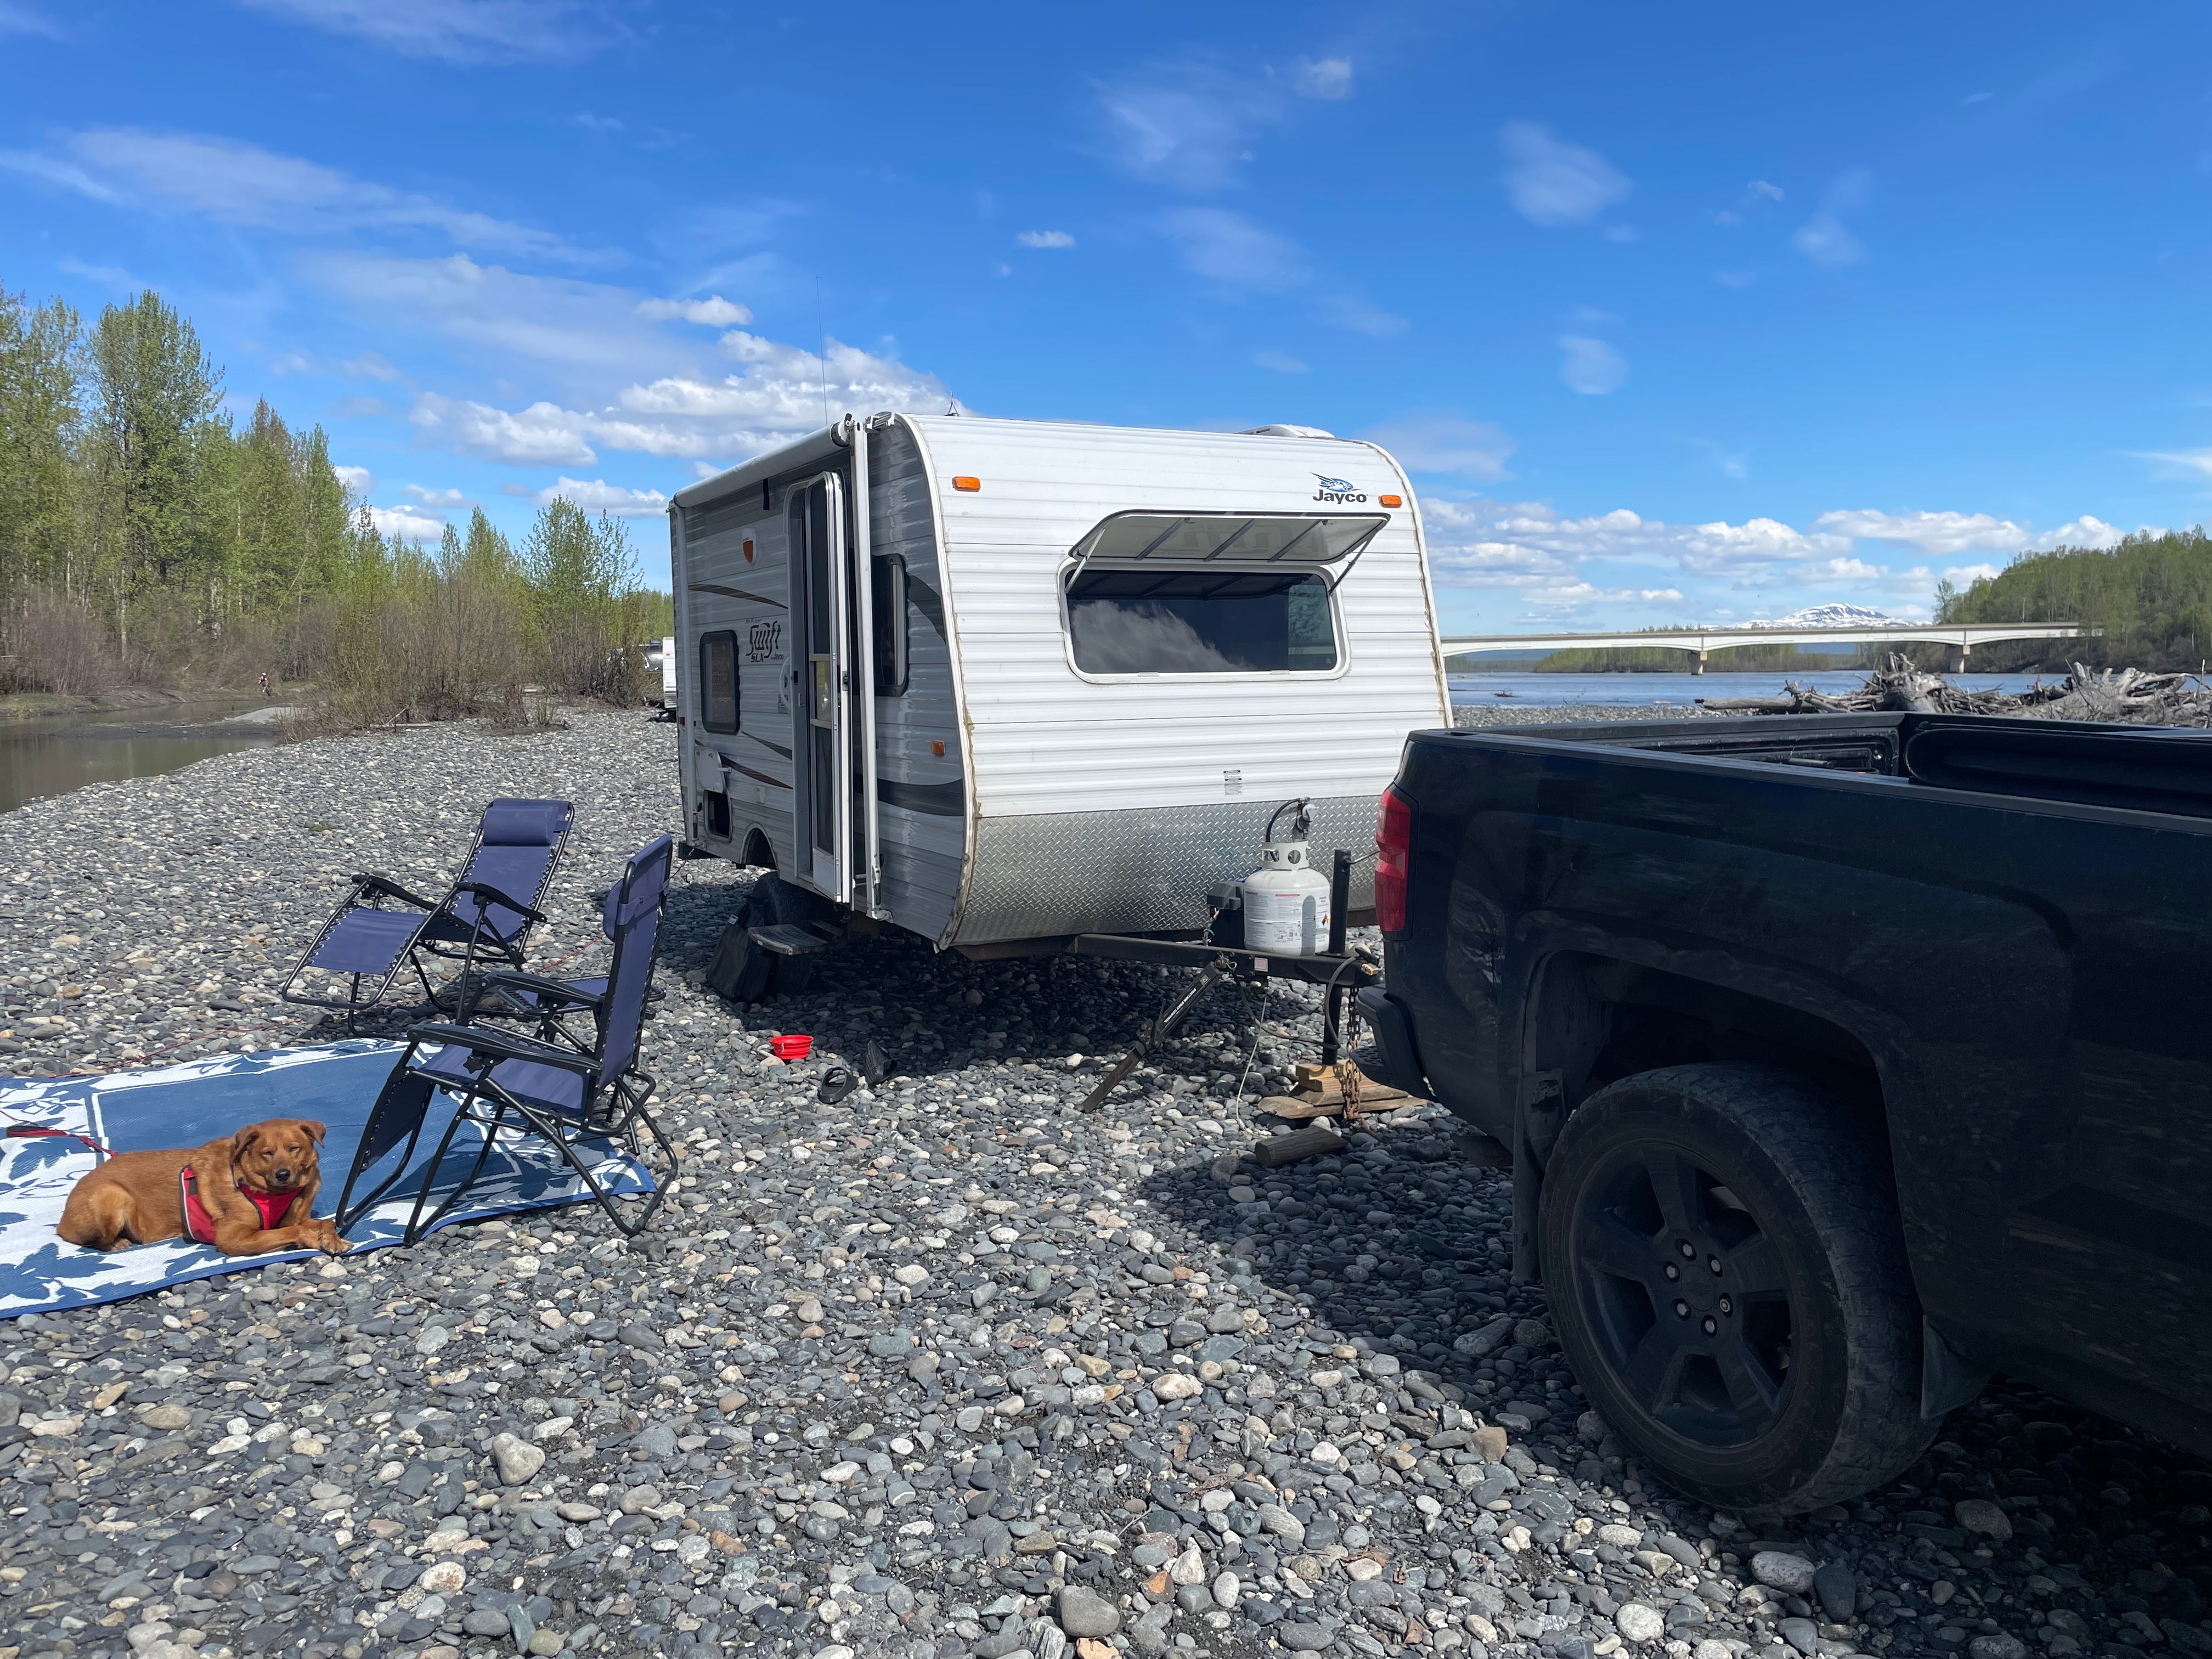 Camper submitted image from Susitna River Banks - 2